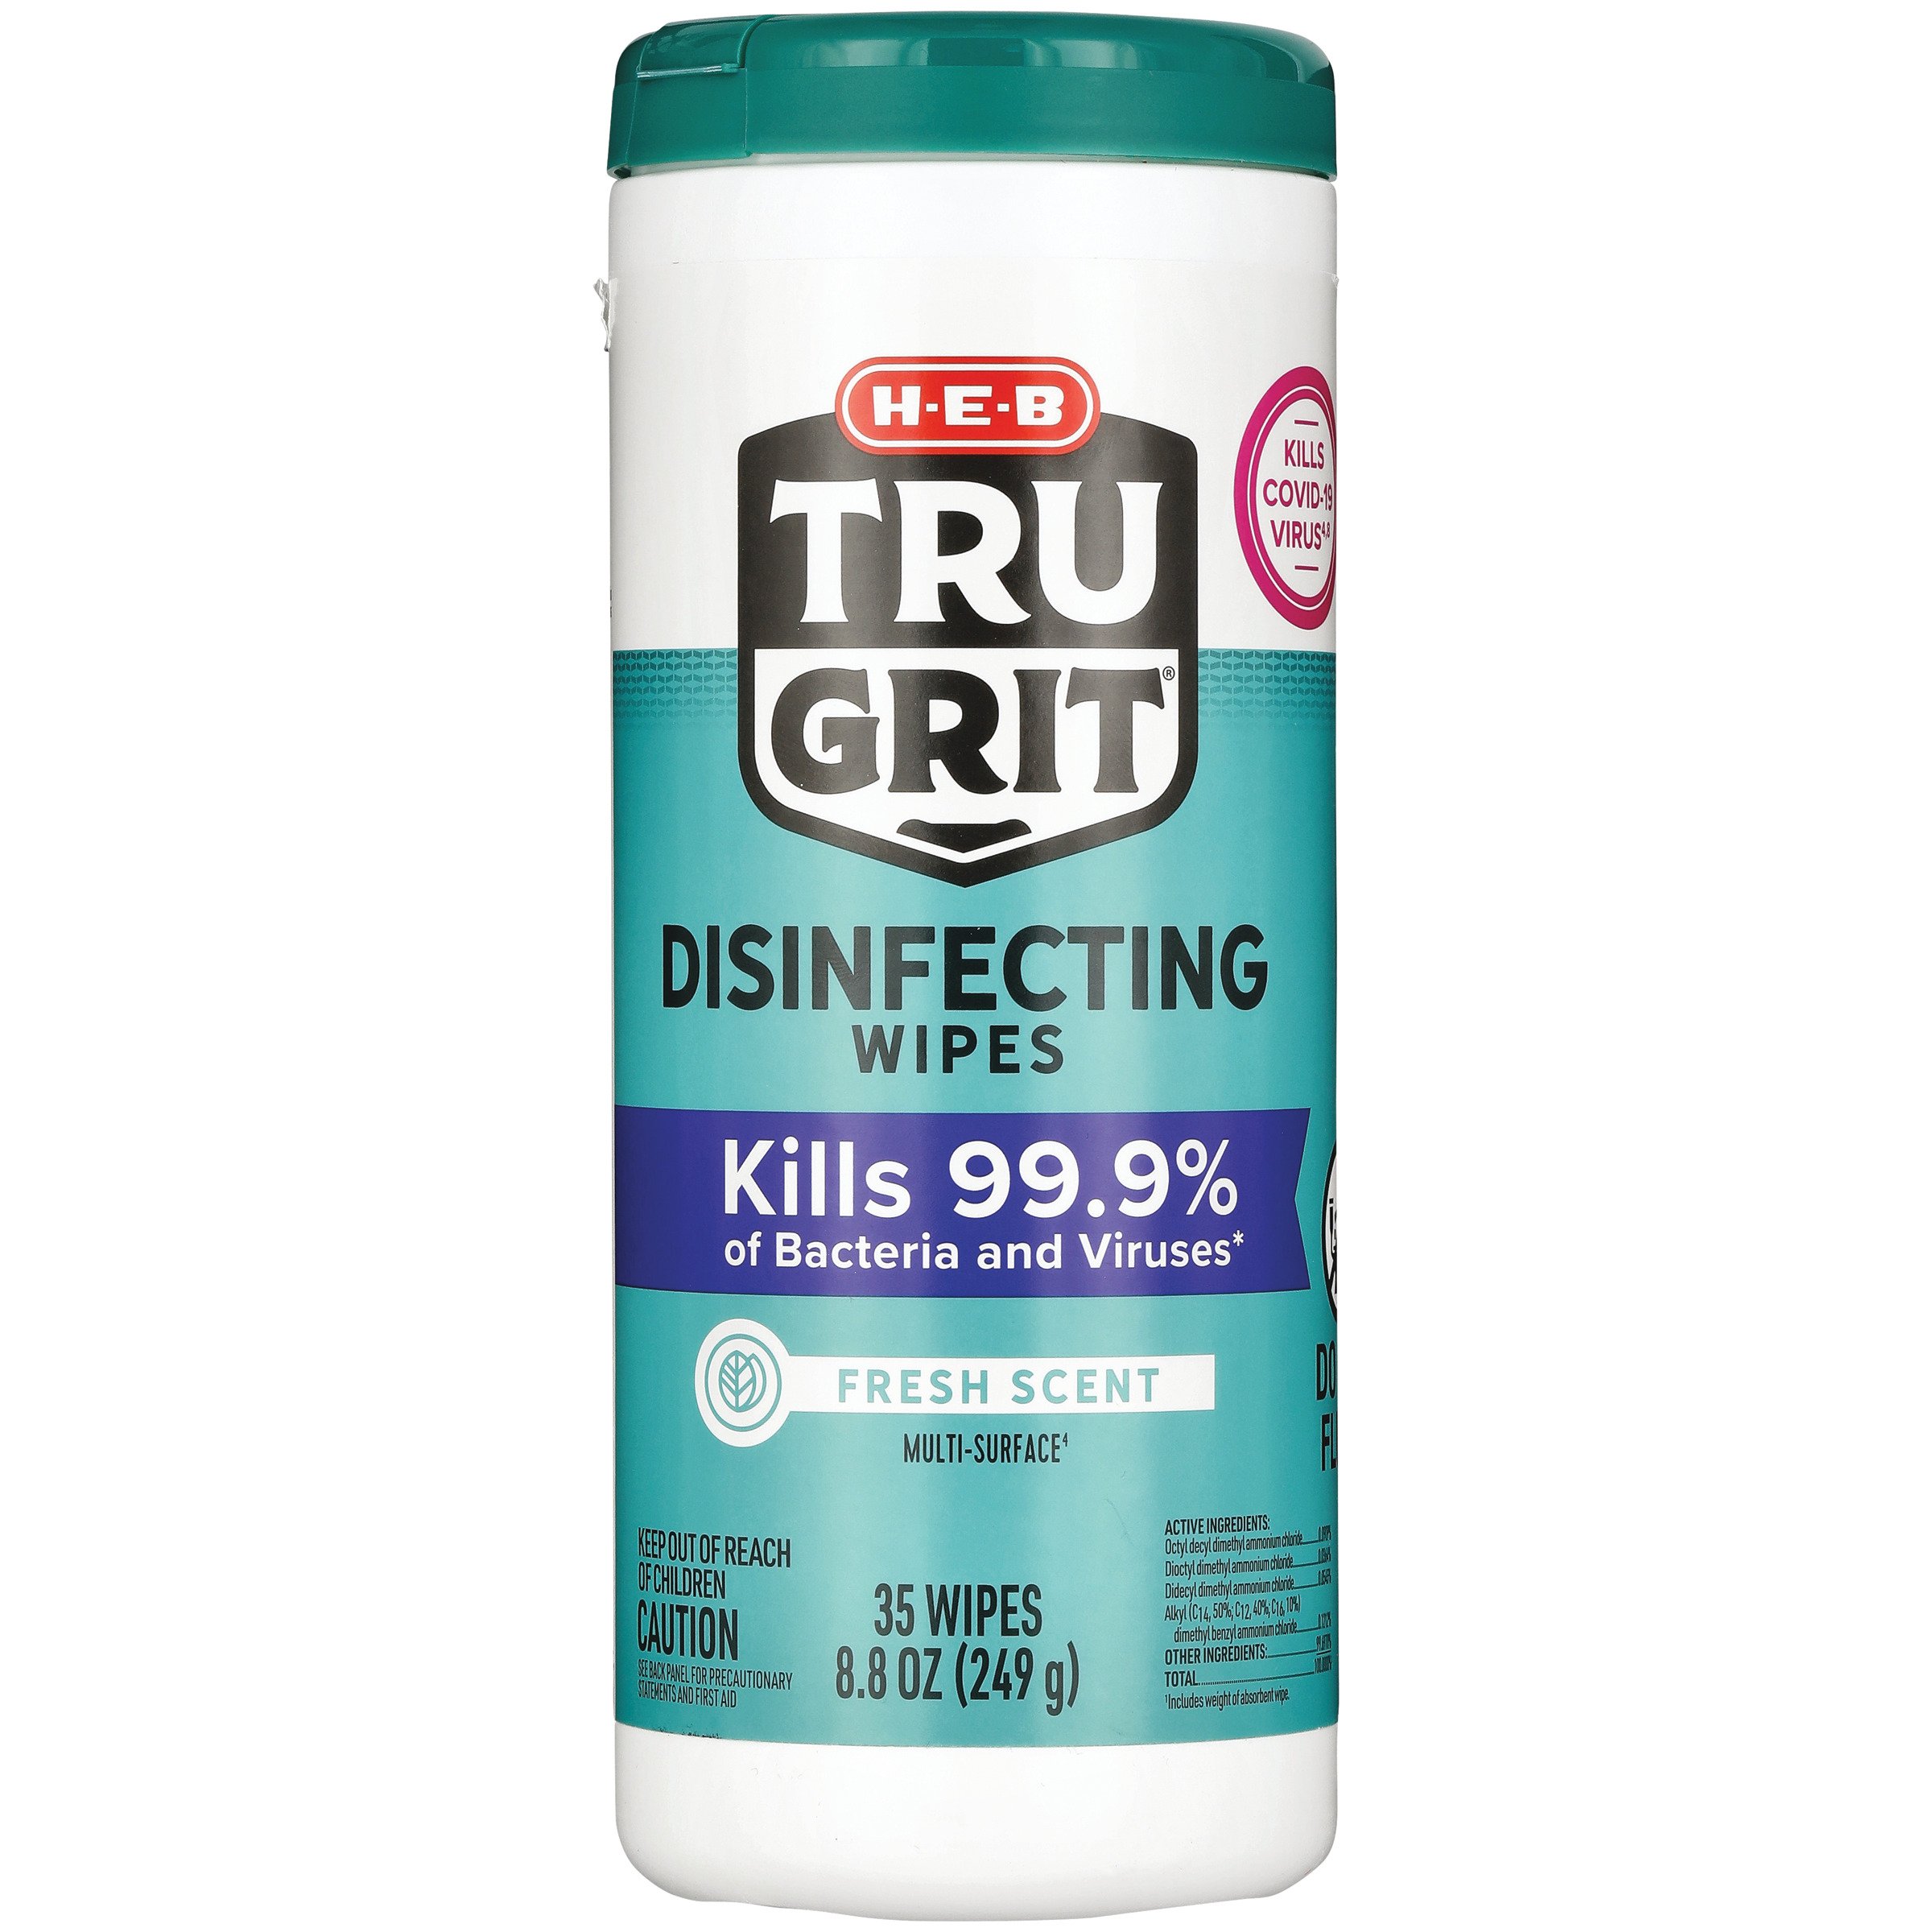 H-E-B Tru Grit Disinfecting Wipes – Fresh Scent - Shop All Purpose Cleaners  at H-E-B